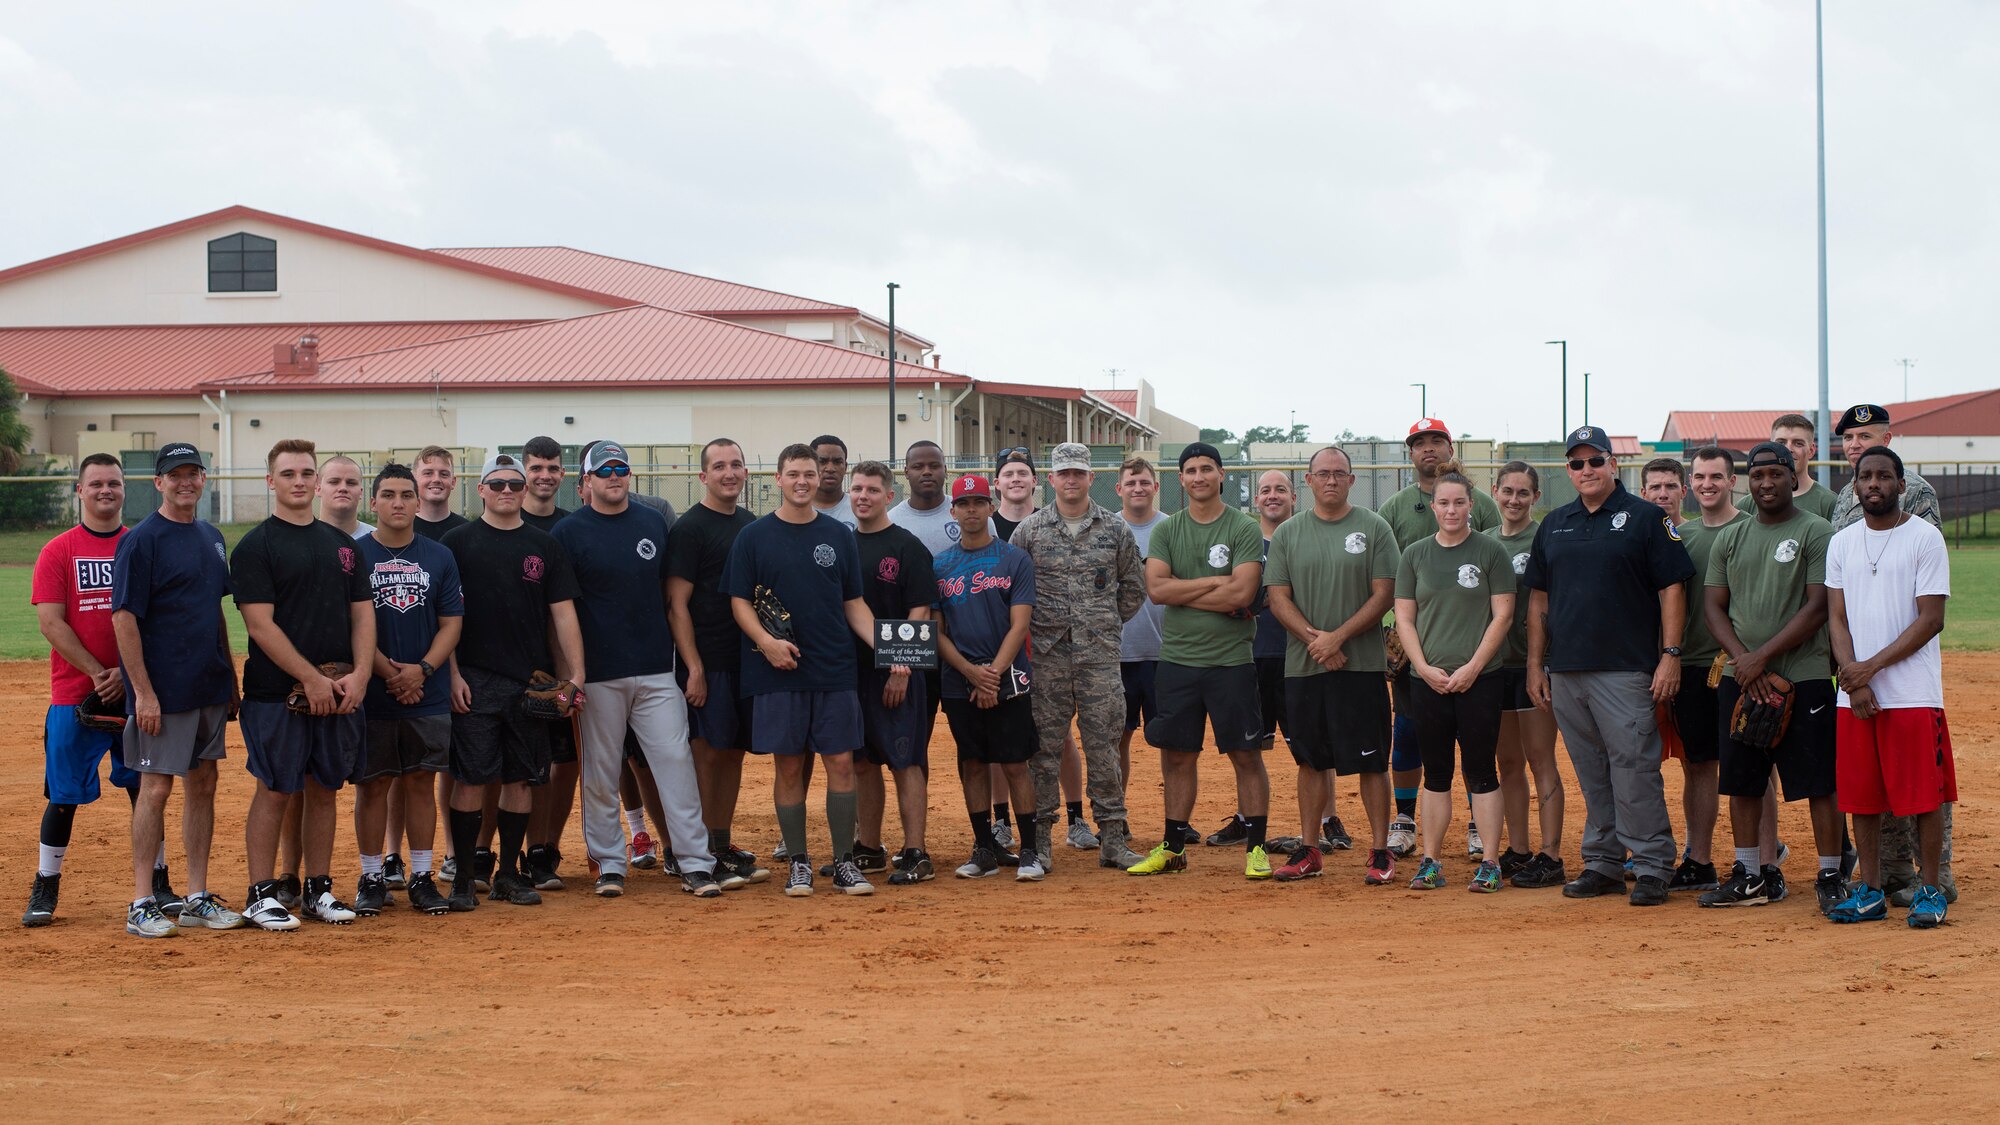 Participants in the 2018 Battle of the Badges softball game between the 6th Civil Engineer Squadron firefighters and the 6th Security Forces Squadron defenders pause for a group photo at MacDill Air Force Base, Fla., Oct. 10, 2018.